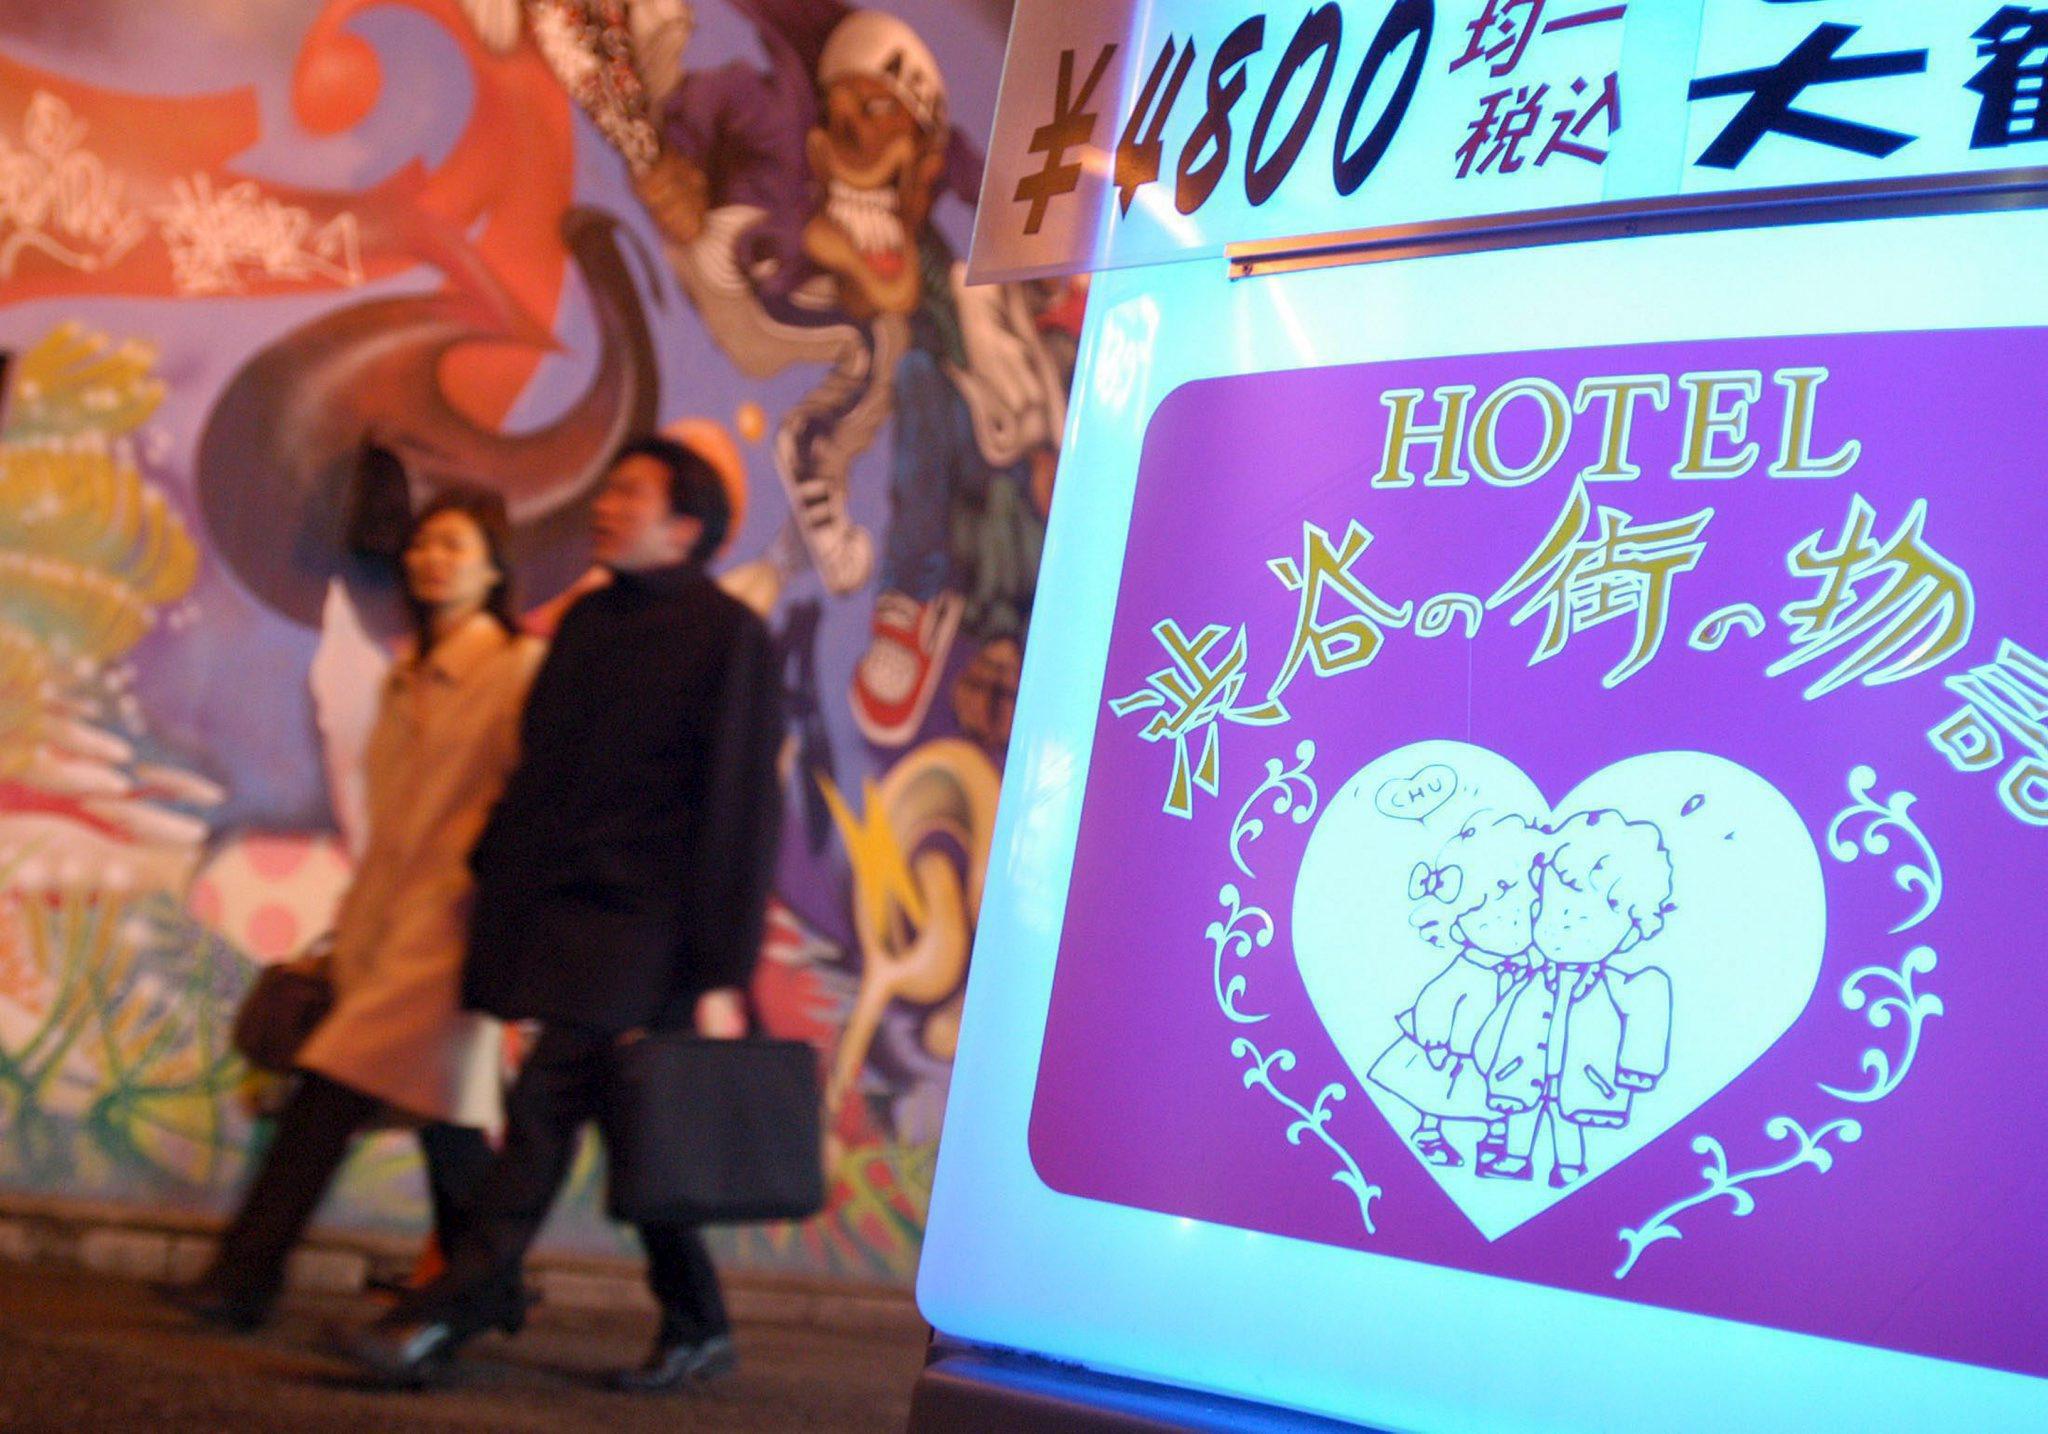 Deaths in love hotels in Japan are rare – but previous incidents have been reported. There are some 4,900 love hotels across Japan. Photo: EPA